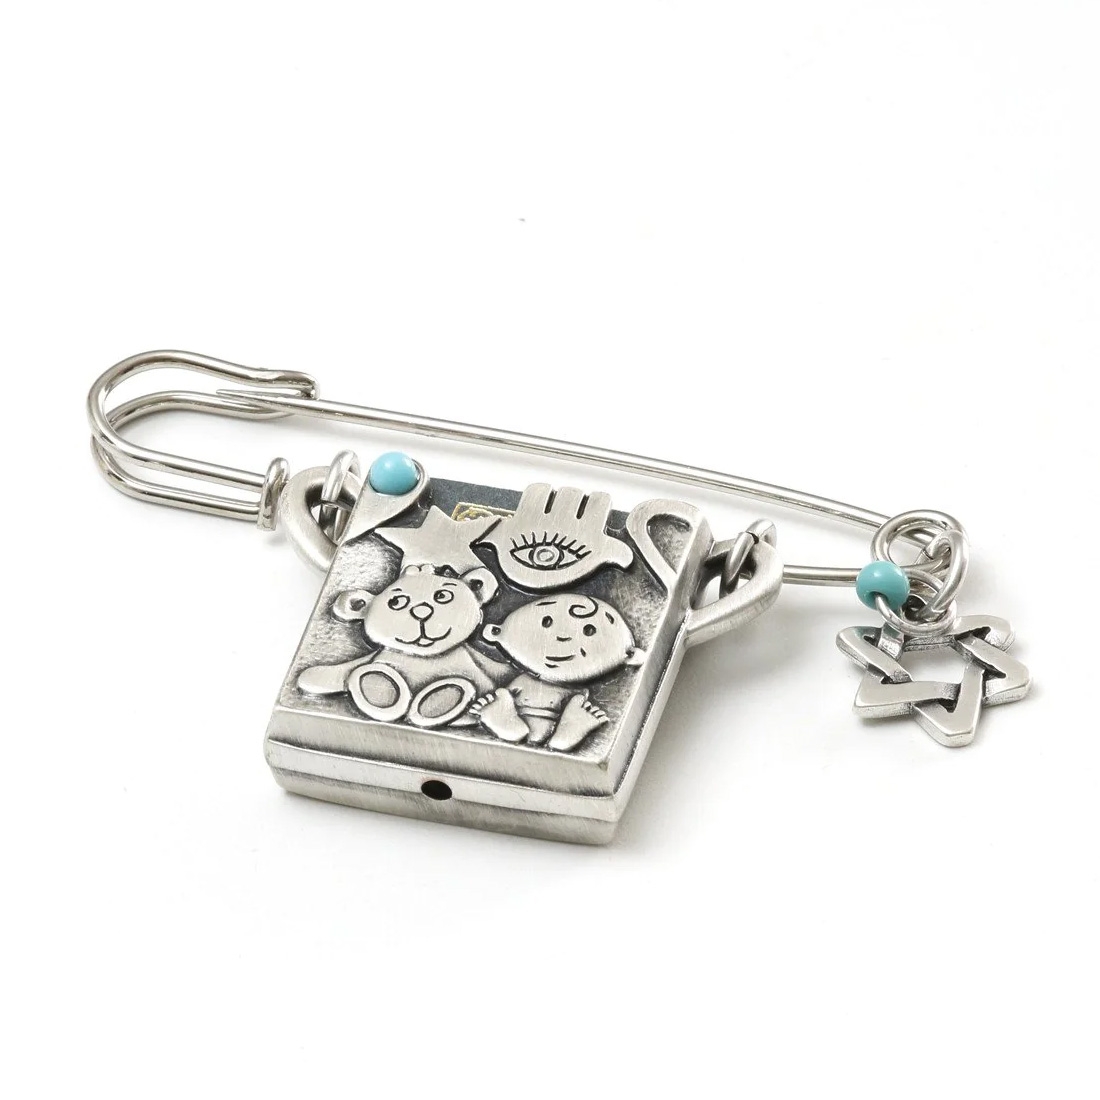 Danon Baby Safety Pin with Star of David and Psalms - 1